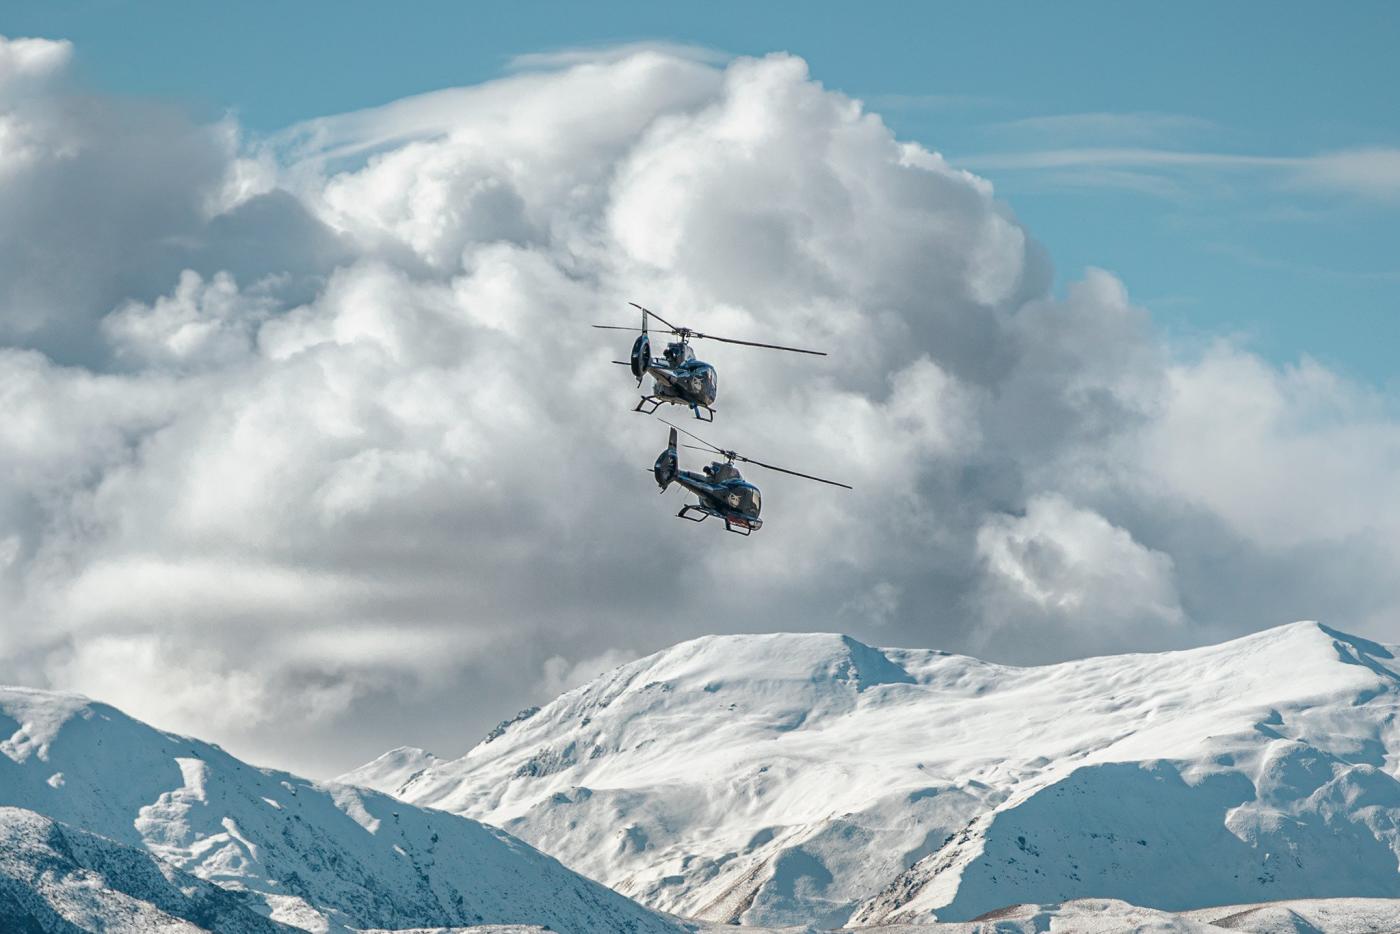 Two Over the Top Helicopters flying over snow covered mountains in winter